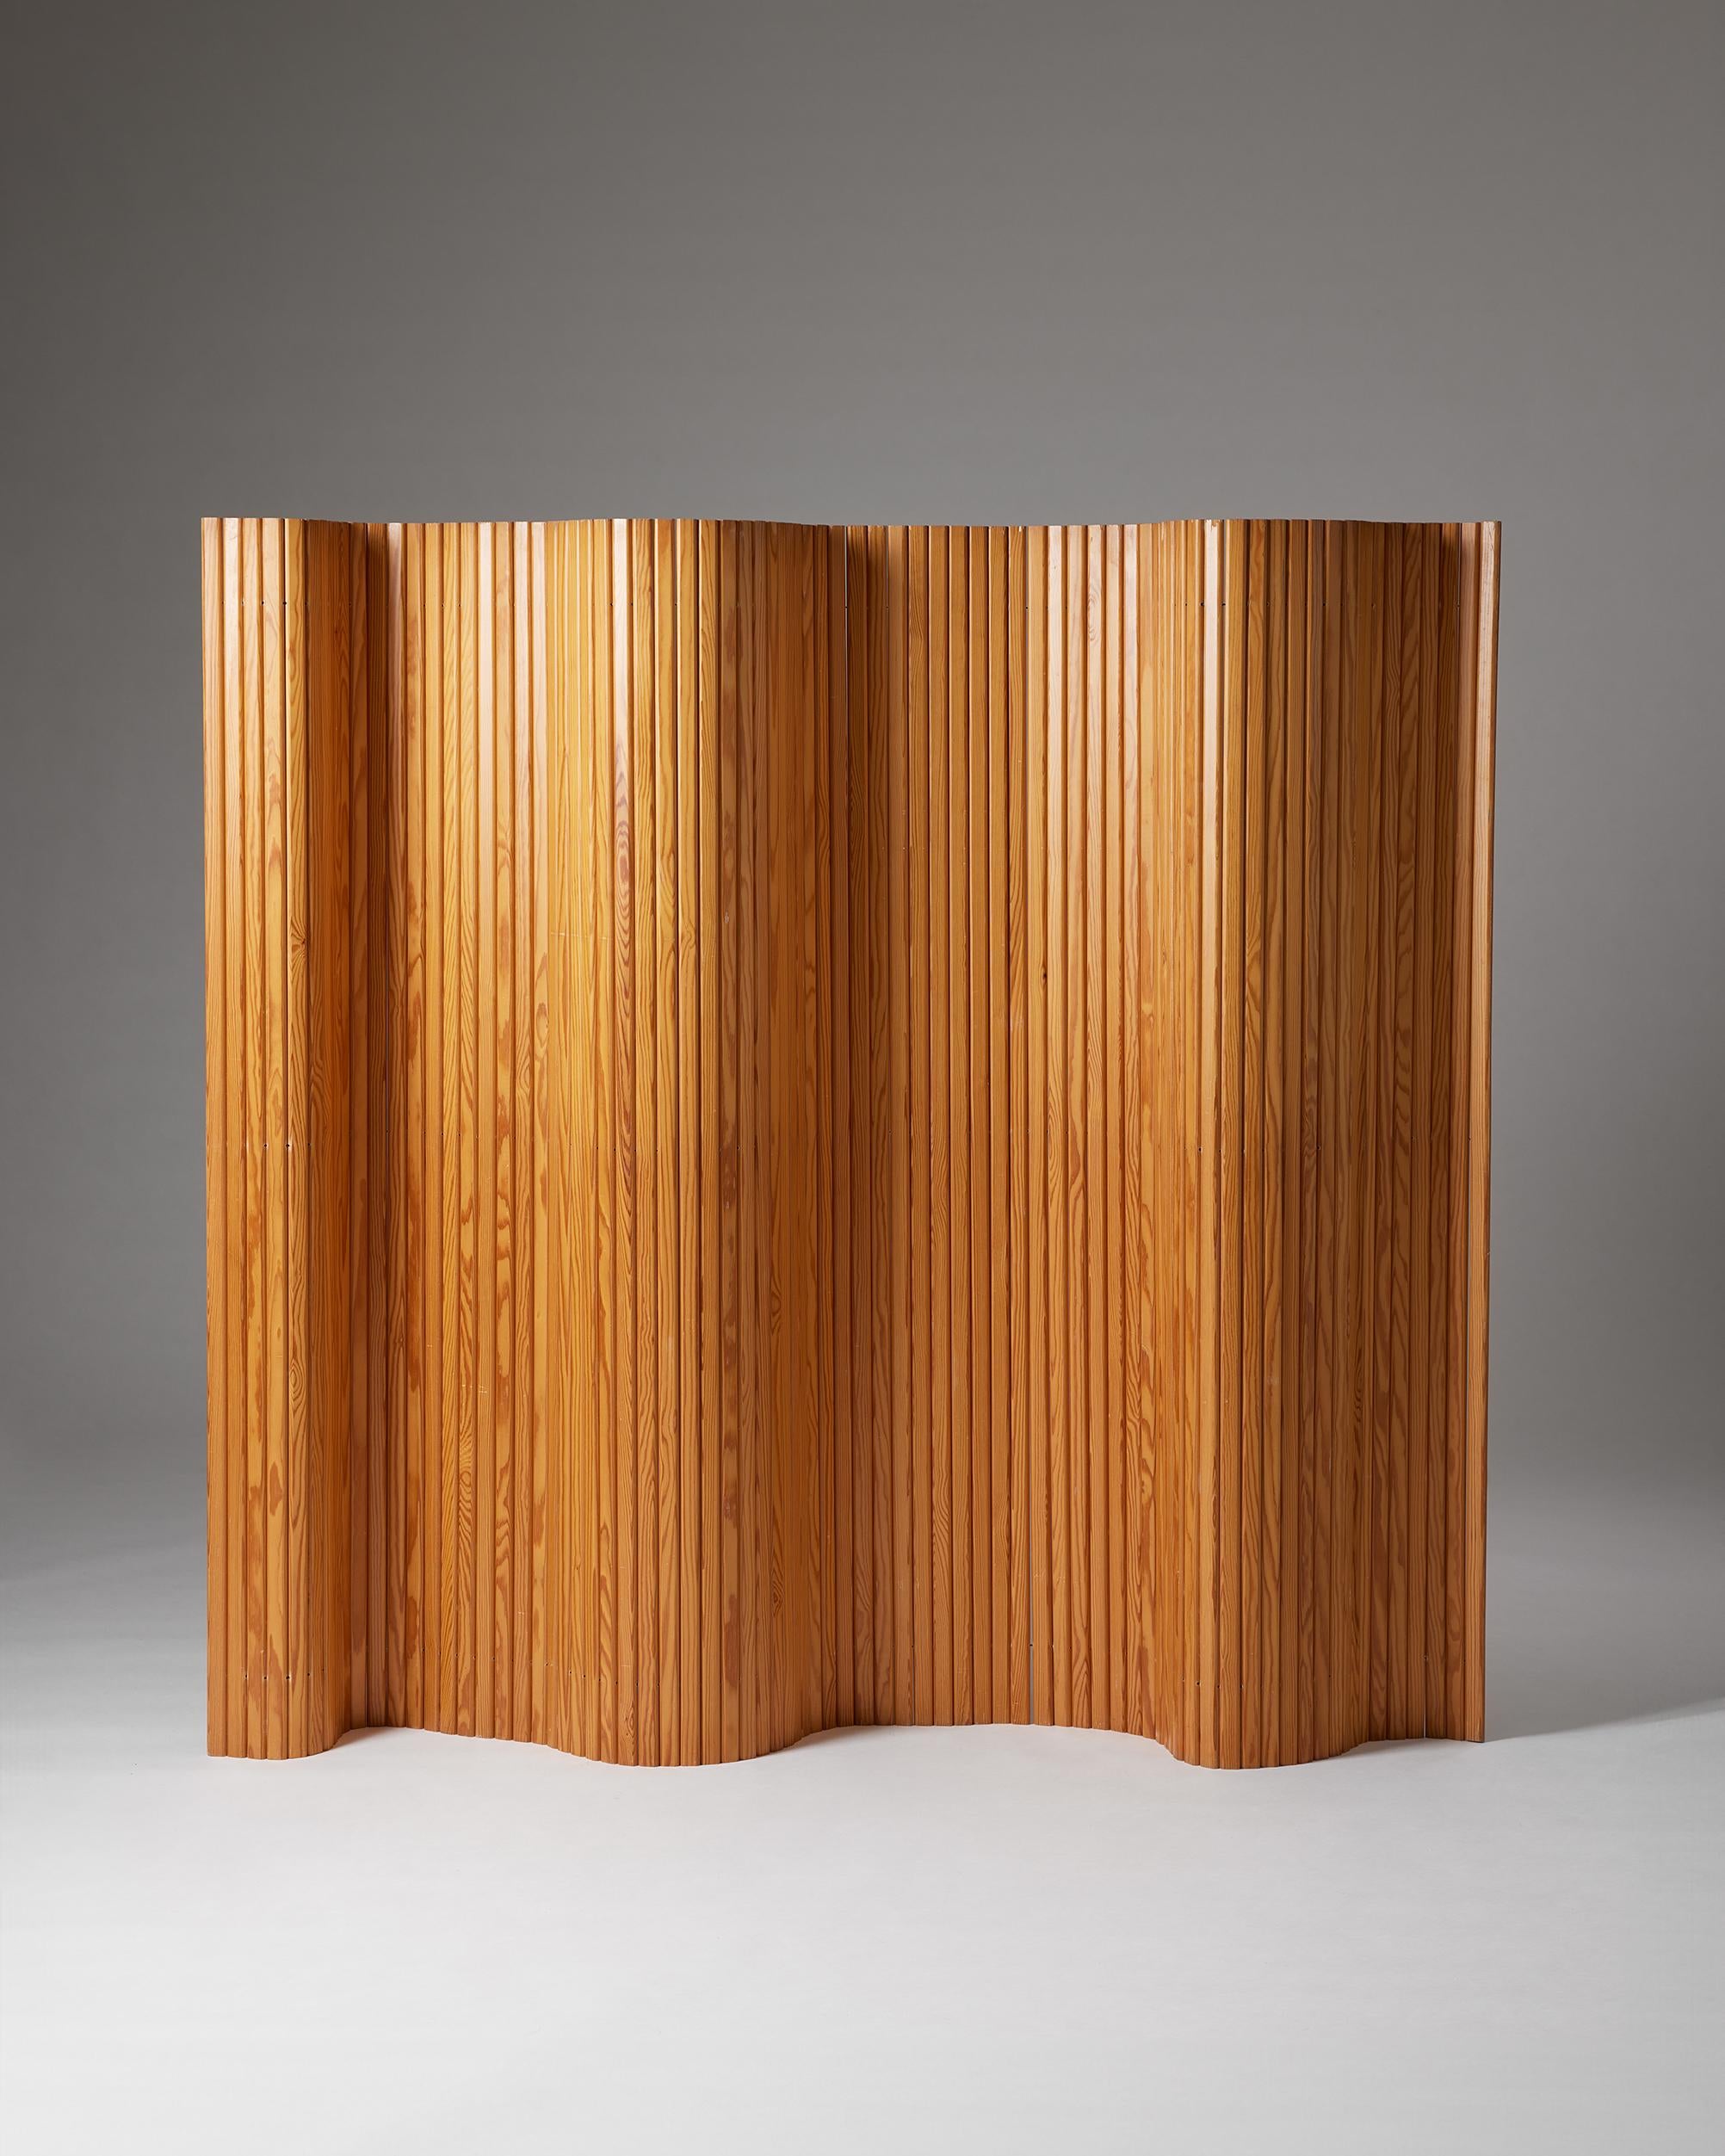 Folding ‘Screen 100’ designed by Alvar Aalto for Artek,
Finland, 1936.

Material: Pine.

Alvar Aalto’s “Screen 100” designed in 1936 is a sculptural room divider made entirely of individual pine slats. This is the rarer long version of the design —